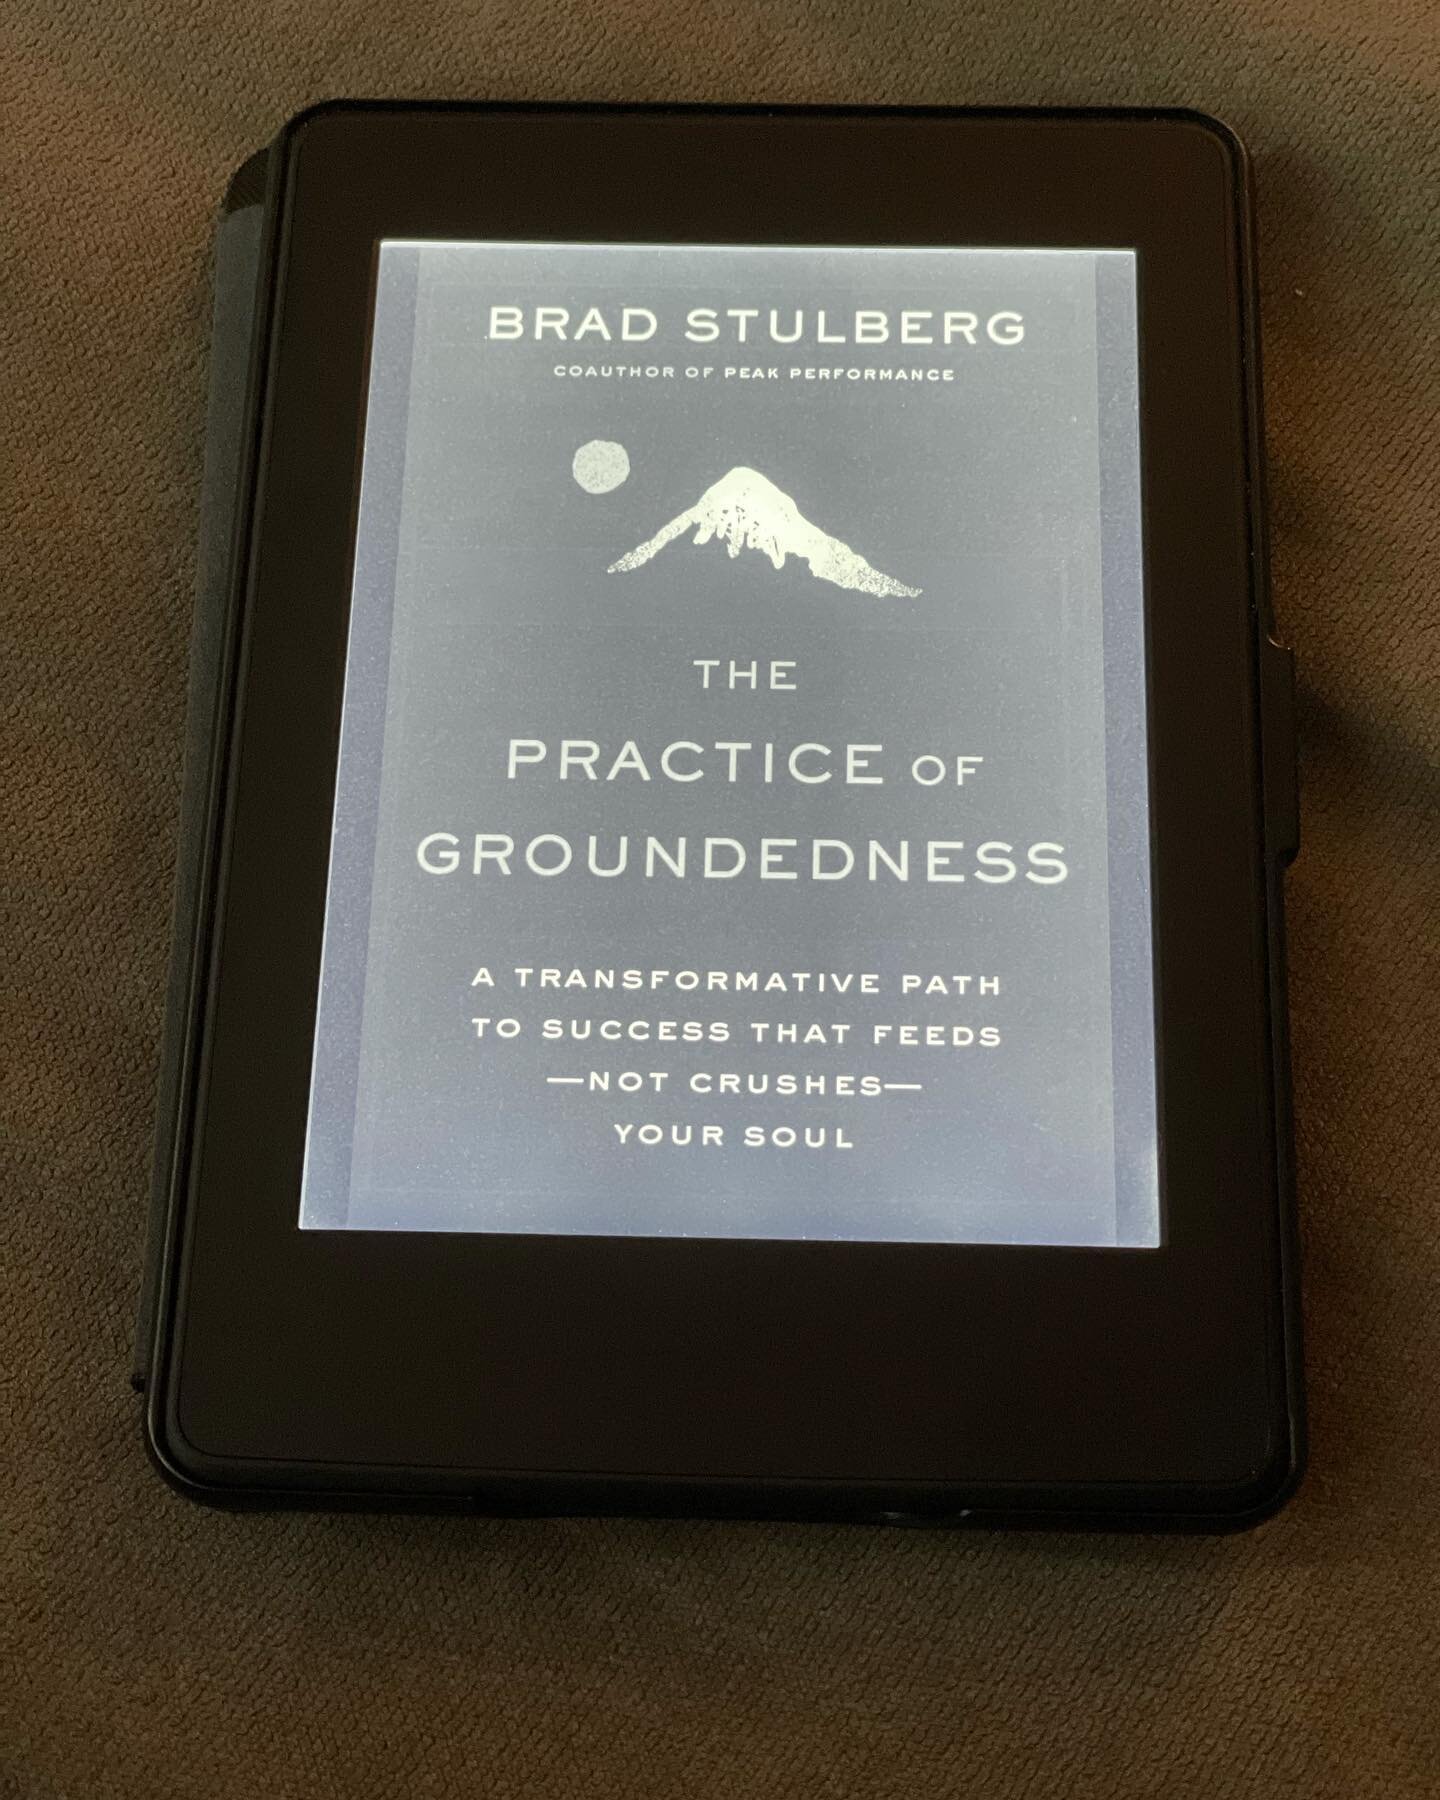 This will go down as one of my favorite reads. Groundedness is something we could all benefit from. This book shares the issues in today&rsquo;s society relating to mental health (see: heroic individualism). It provides the equation to happiness. Hap